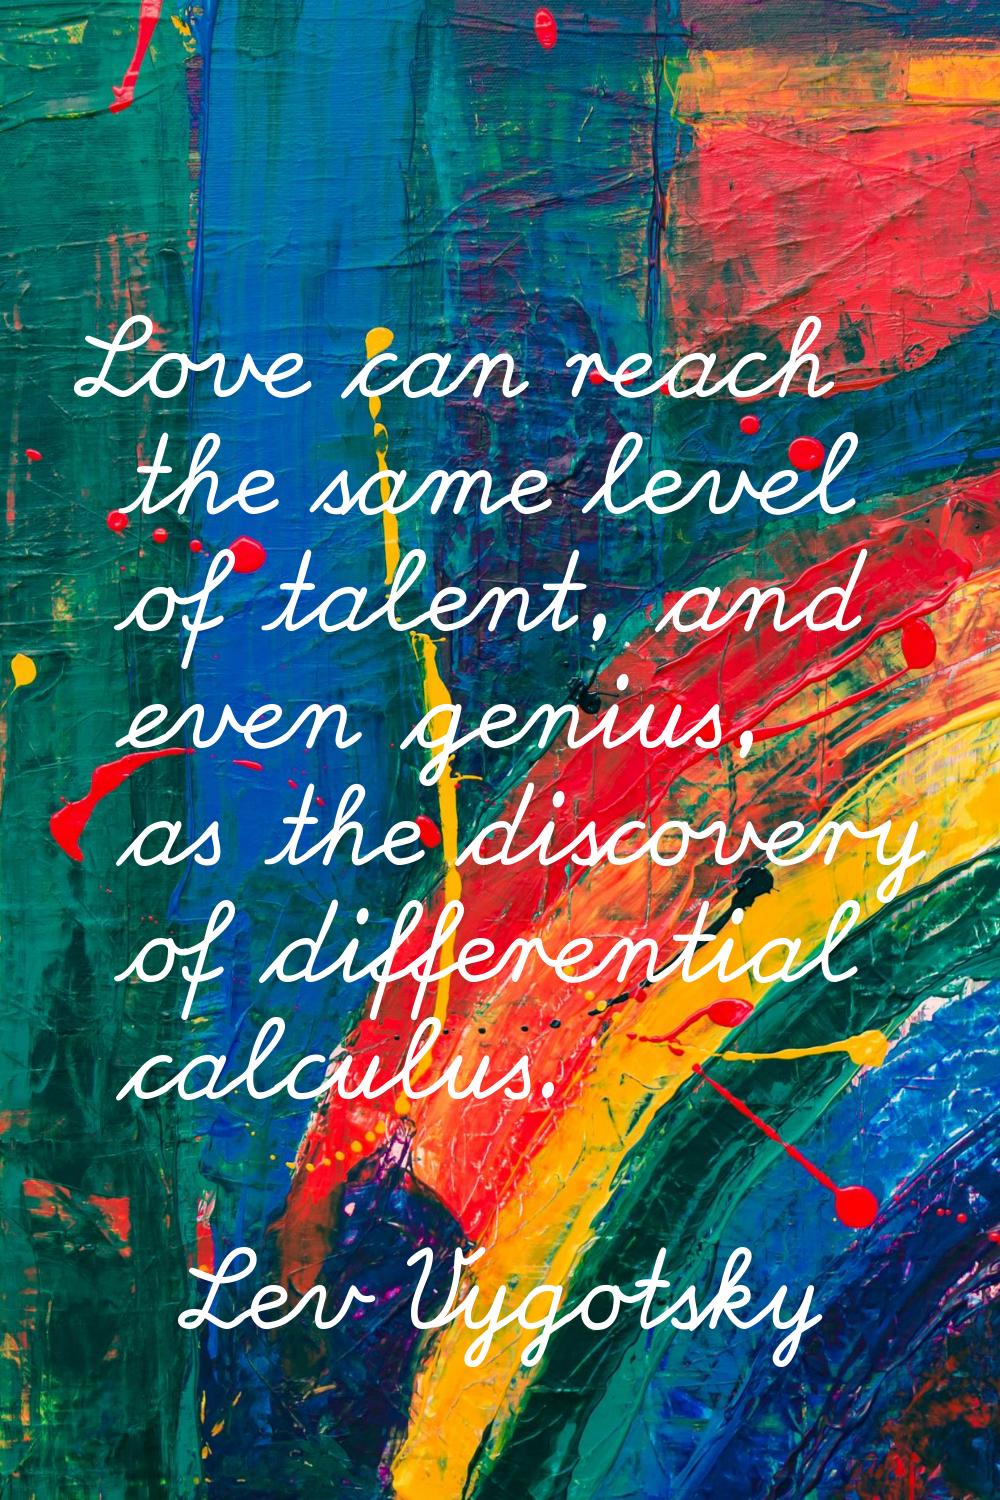 Love can reach the same level of talent, and even genius, as the discovery of differential calculus